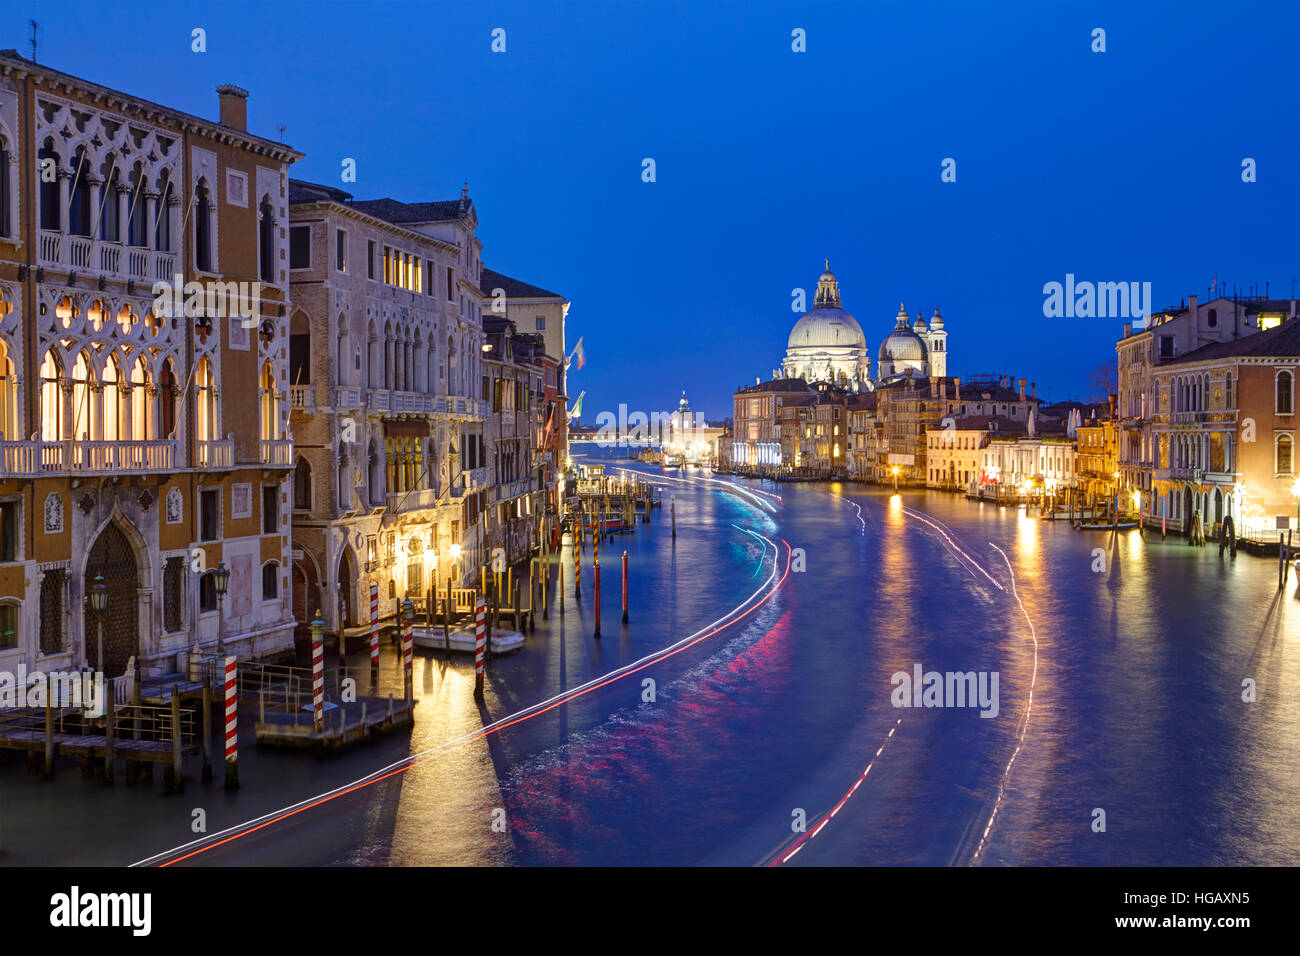 View of the Grand Canal and the Basilica of Santa Maria della Salute, from the Bridge of Academy, Venice, Italy Stock Photo